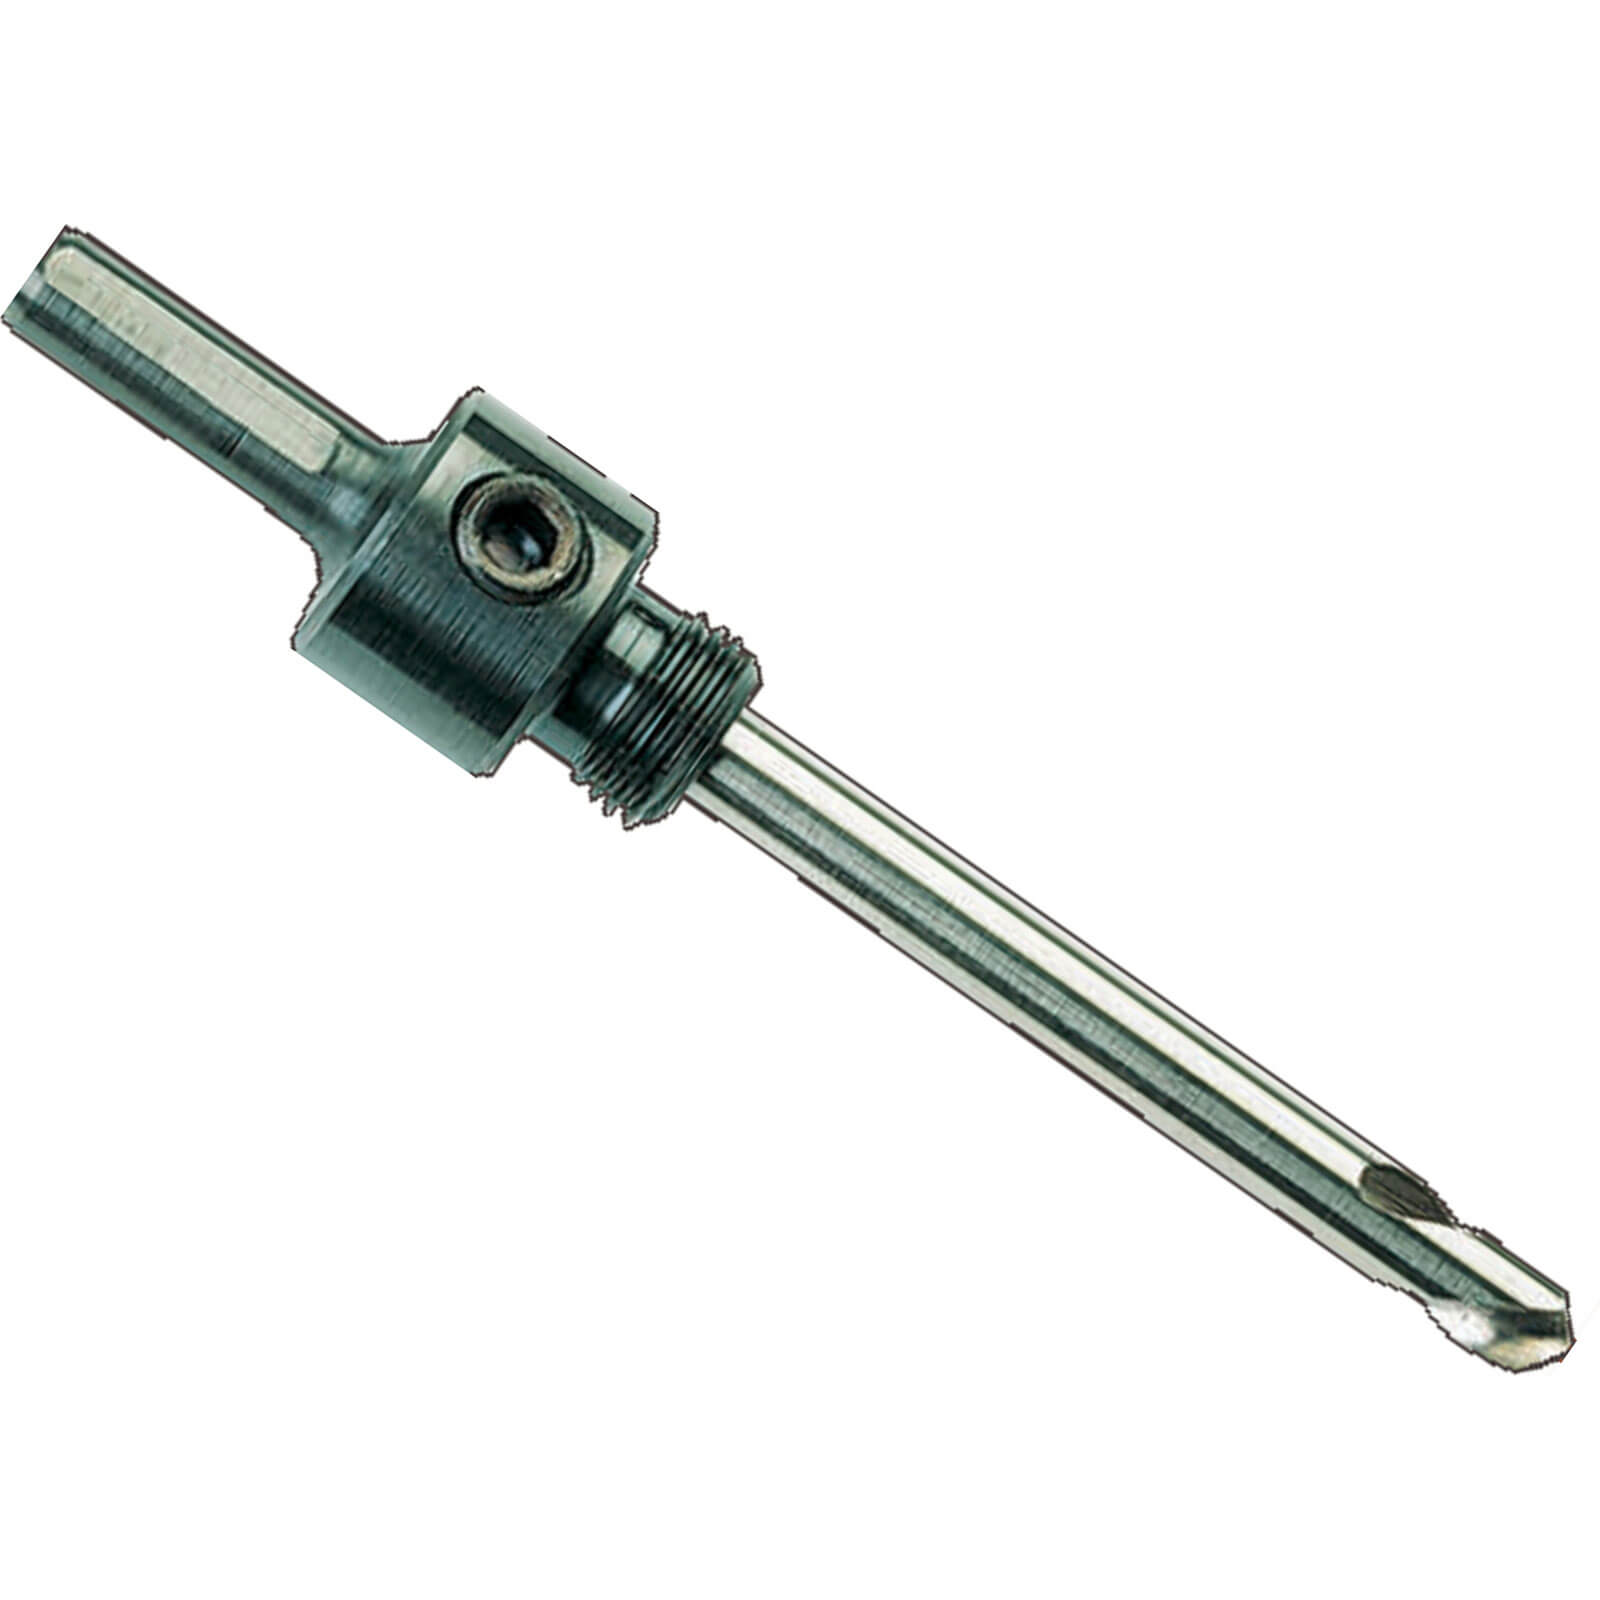 Photo of Bahco Arbor 6.5mm Shank To Suit 14mm - 30mm Hole Saws